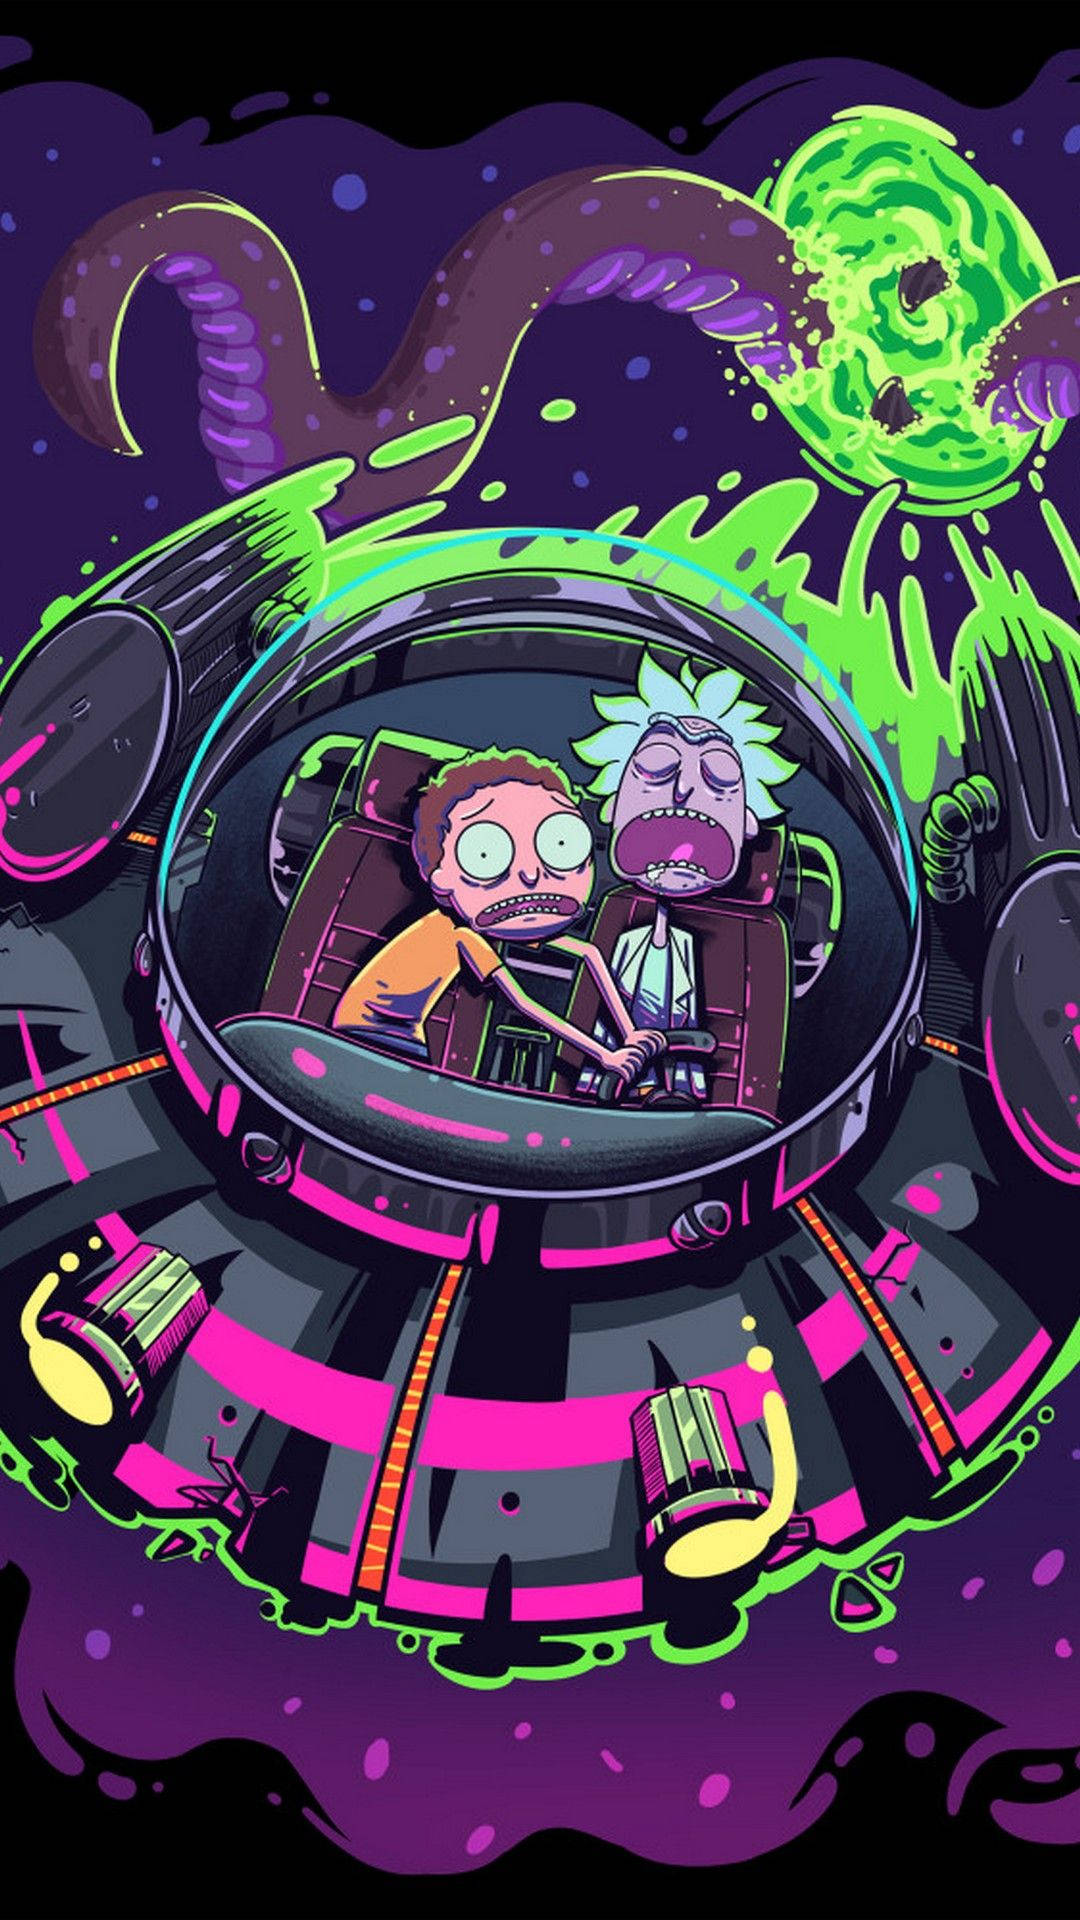 Rick and Morty Going On an Adventure Wallpaper